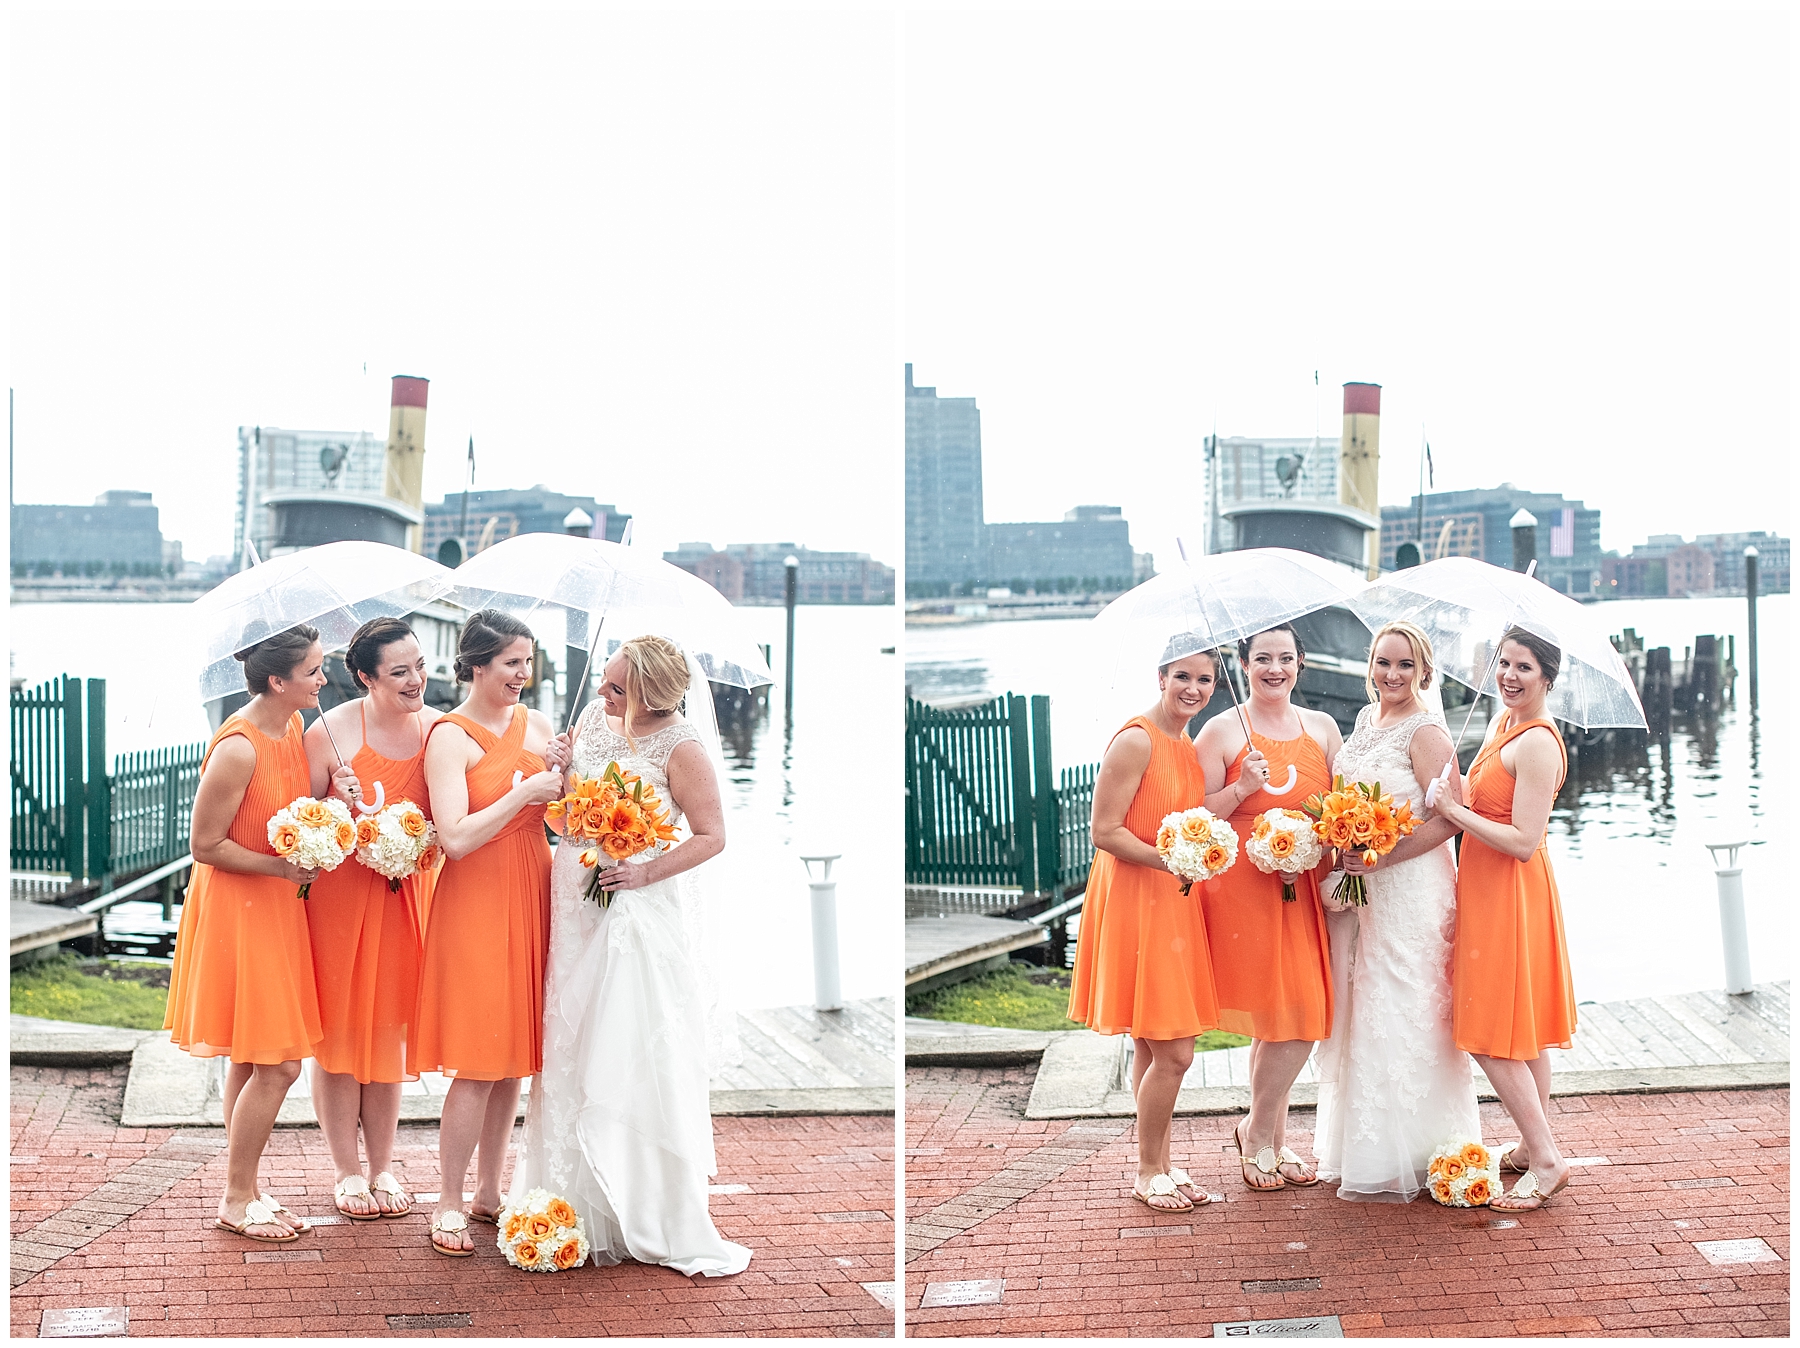 Tess Ray Baltimore Museum of Industry Rainy Day Wedding Living Radiant Photography photos_0056.jpg